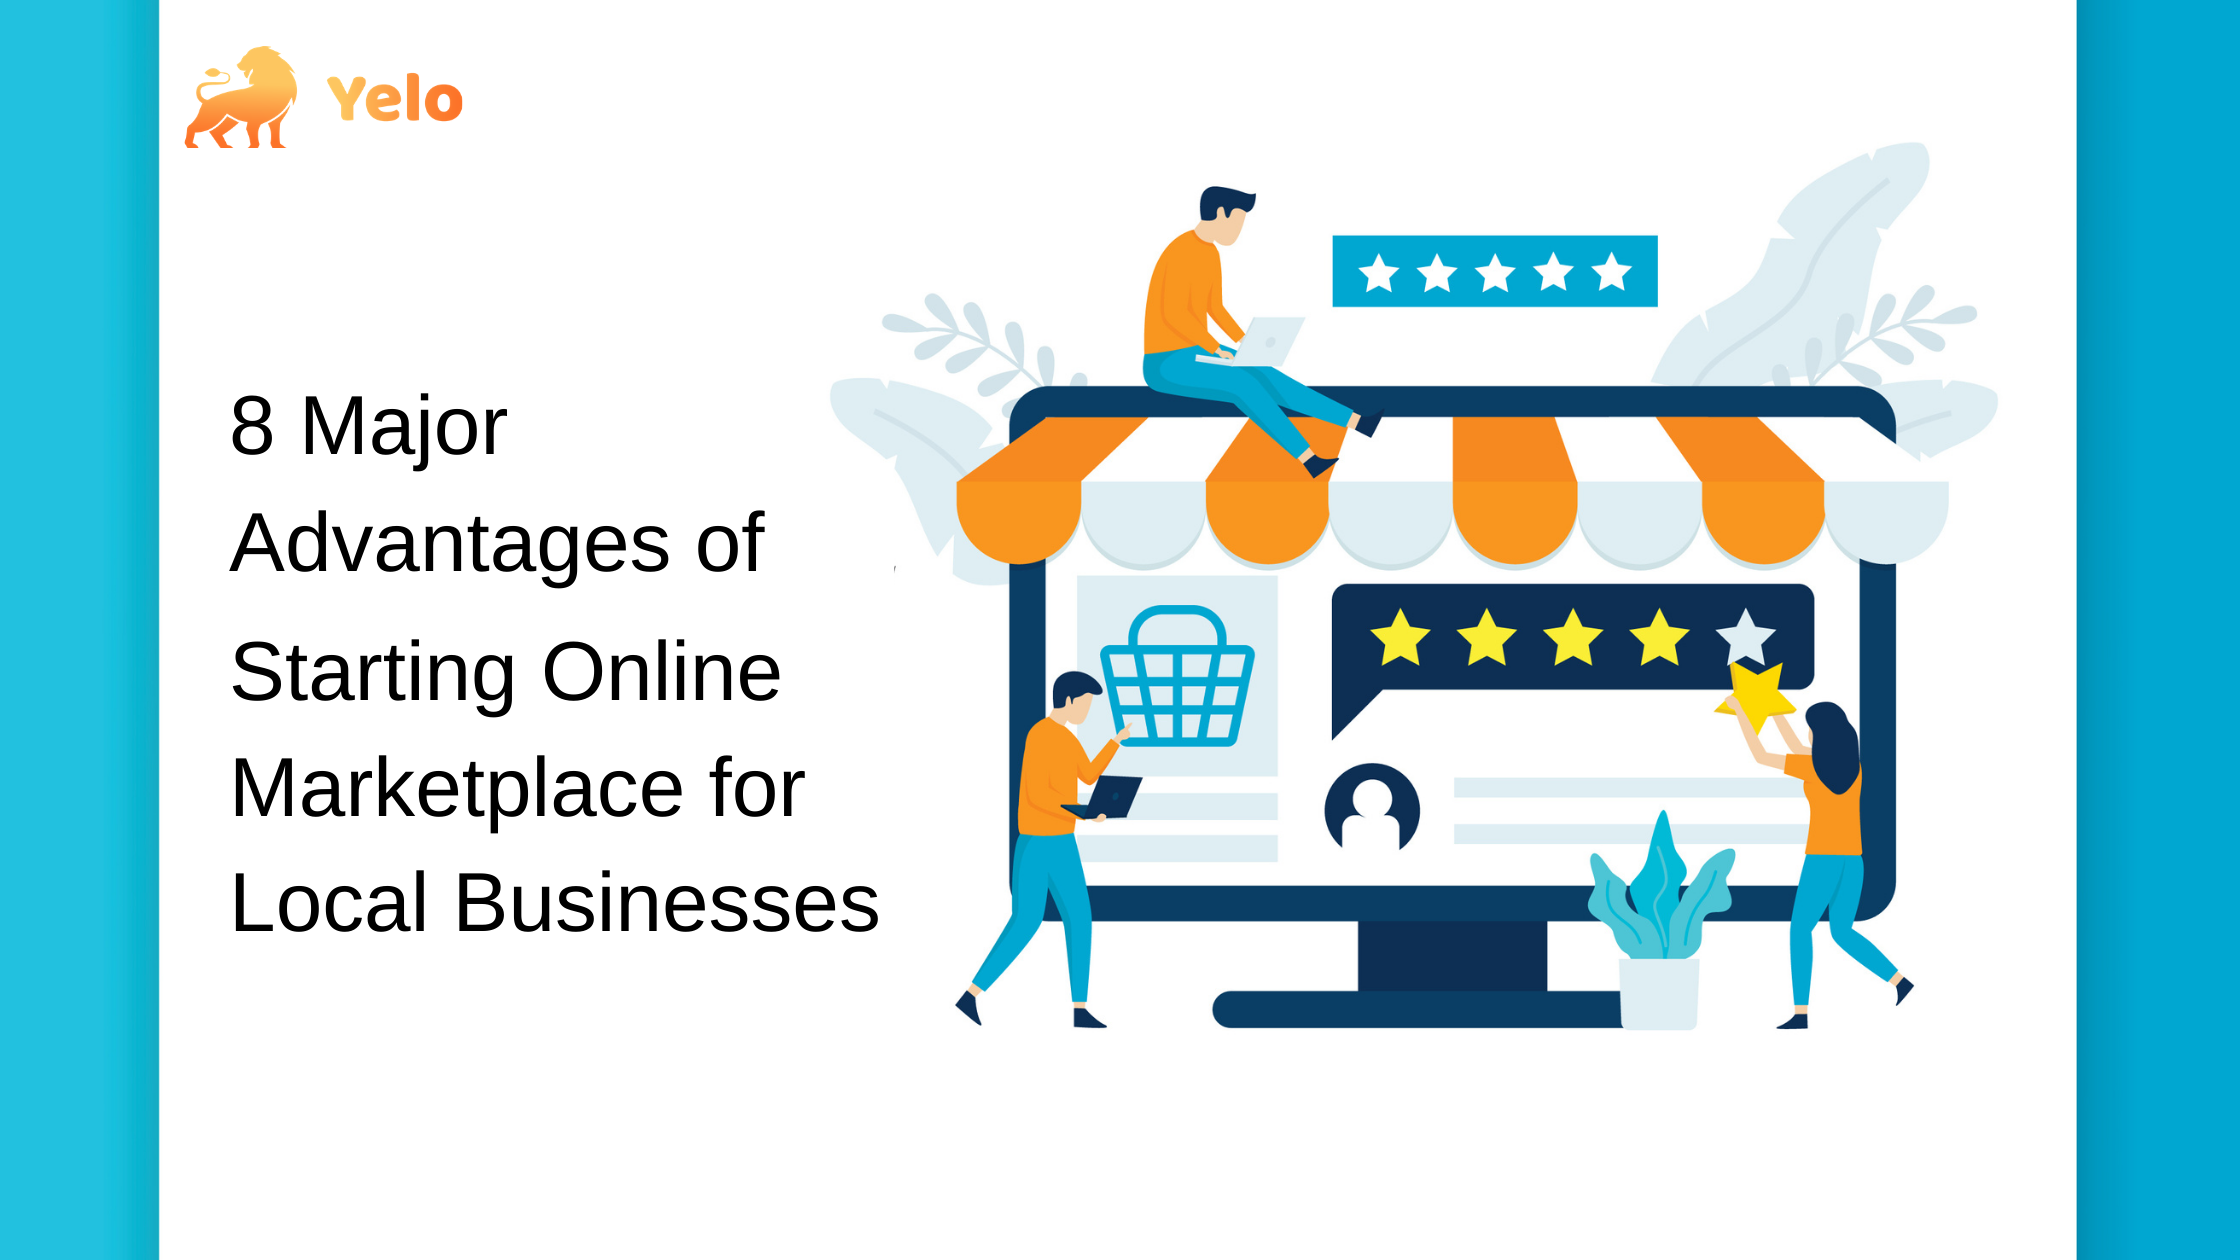 8 Major Advantages of Starting Online Marketplace for Local Businesses